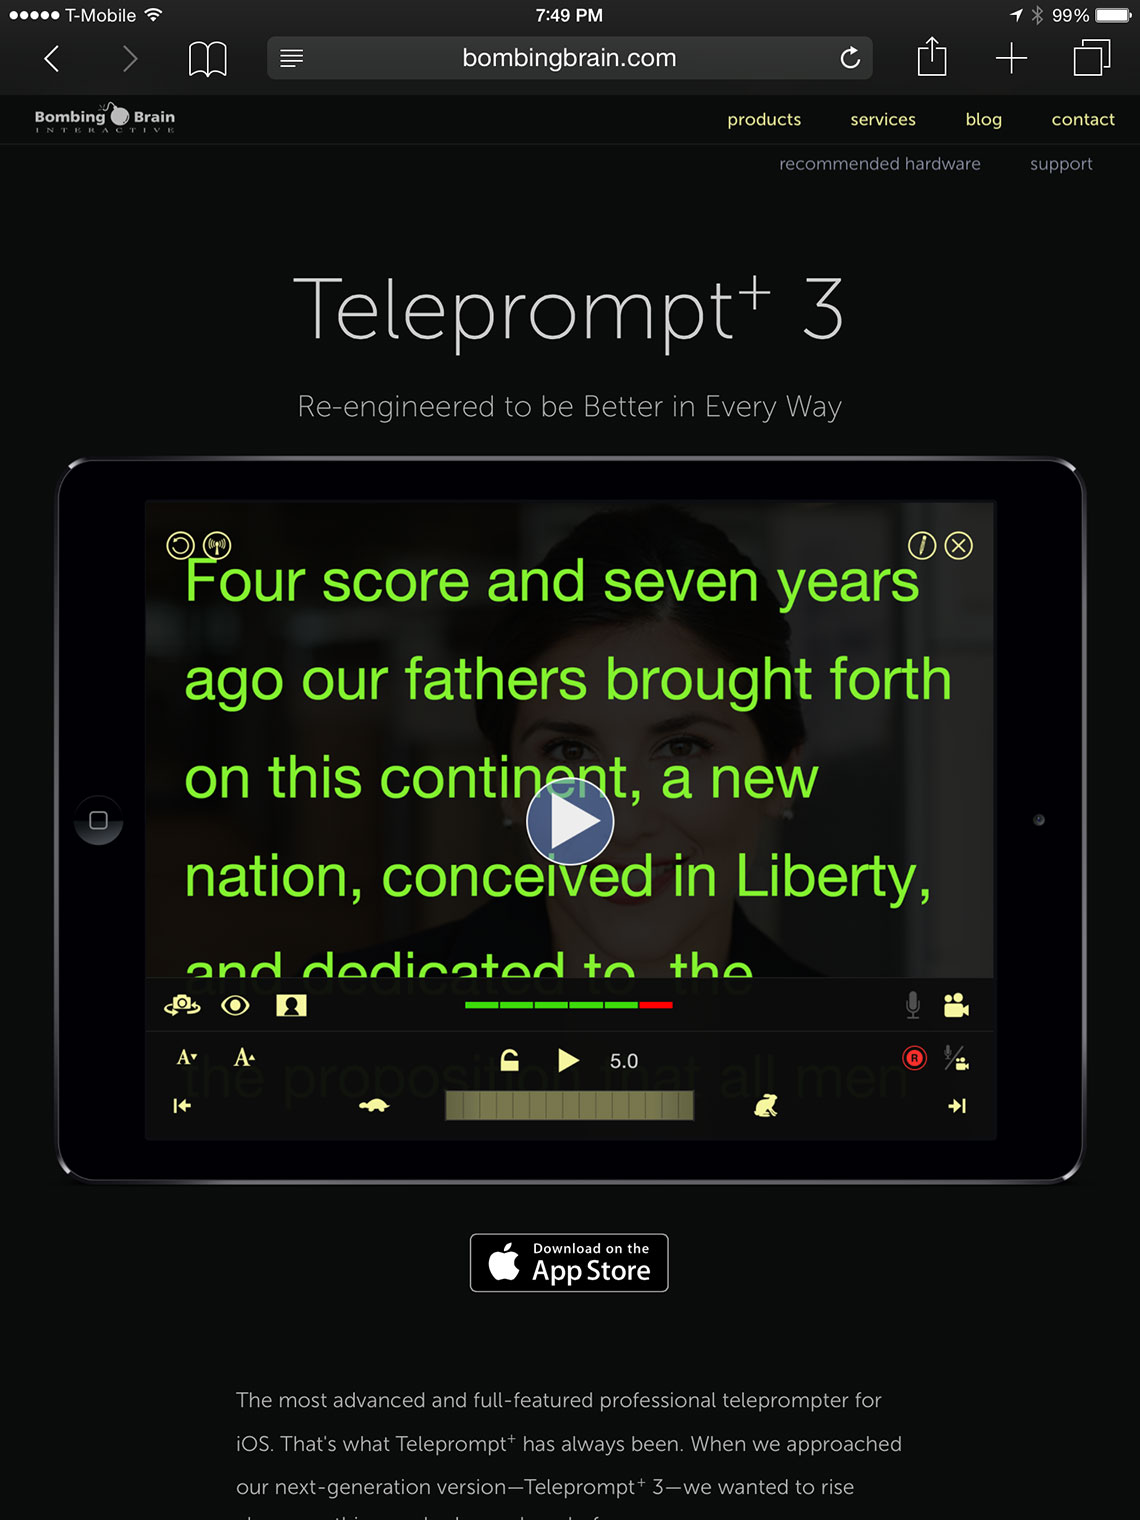 Web site for Teleprompt+